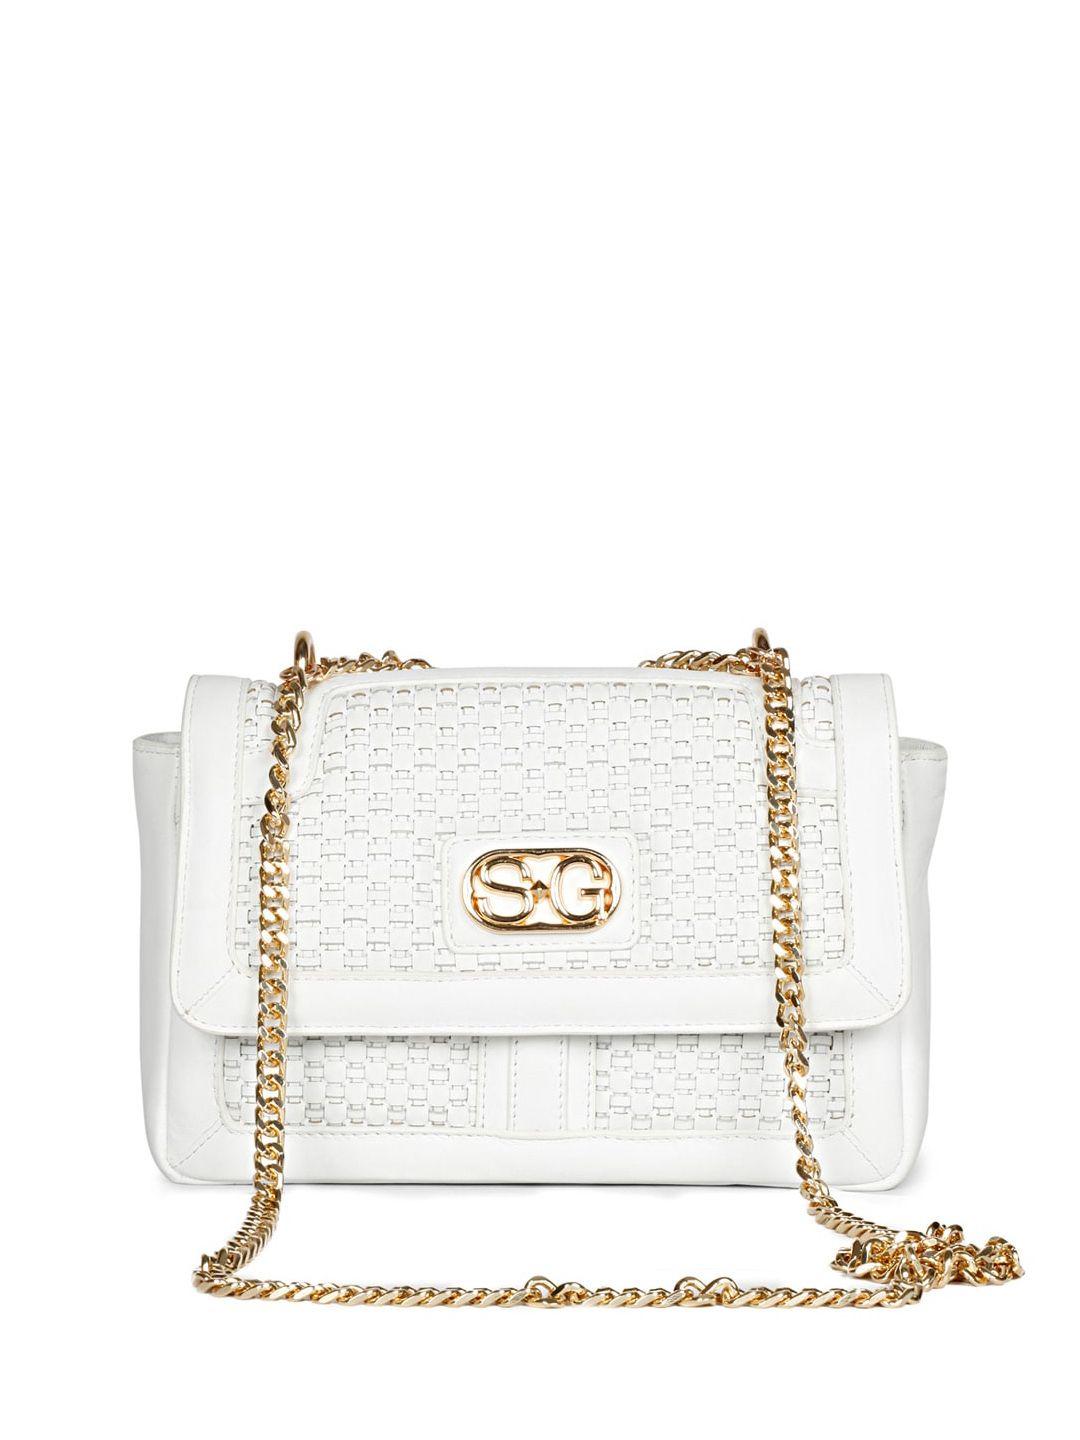 saint g white textured structured leather sling bag